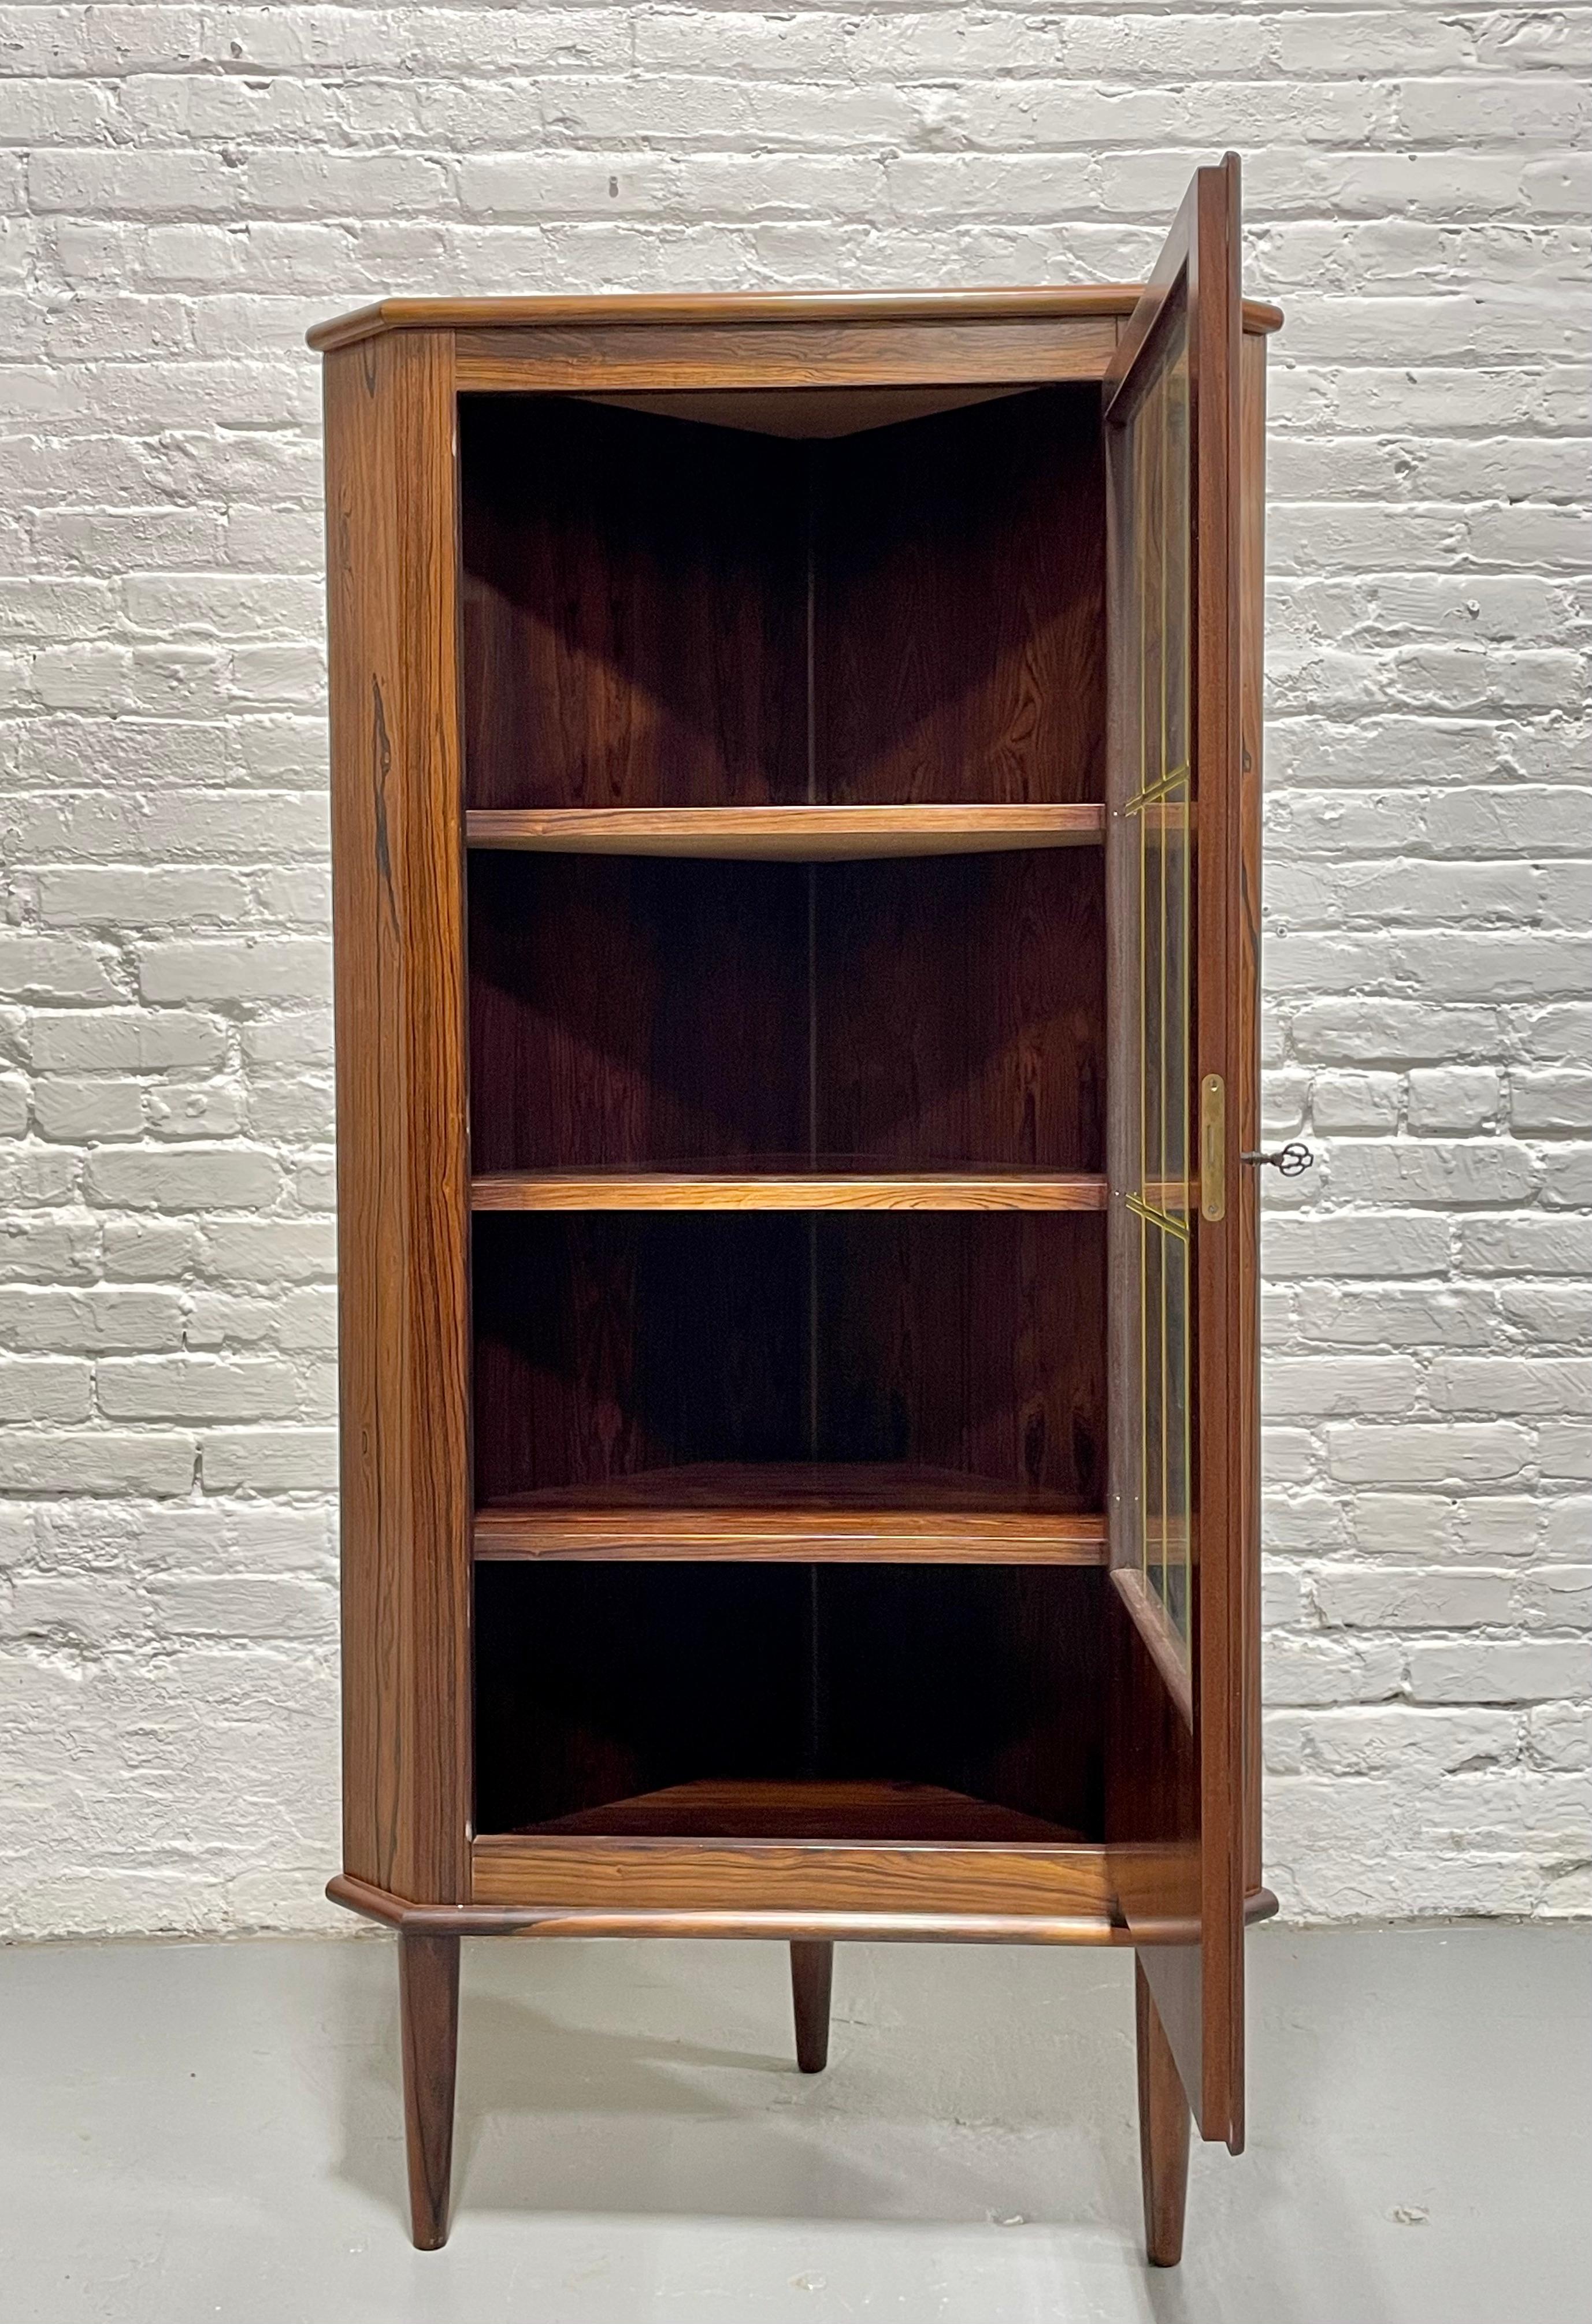 Mid-20th Century ROSEWOOD Mid Century Modern CORNER Bookcase / China or Liquor Cabinet, c. 1960s For Sale